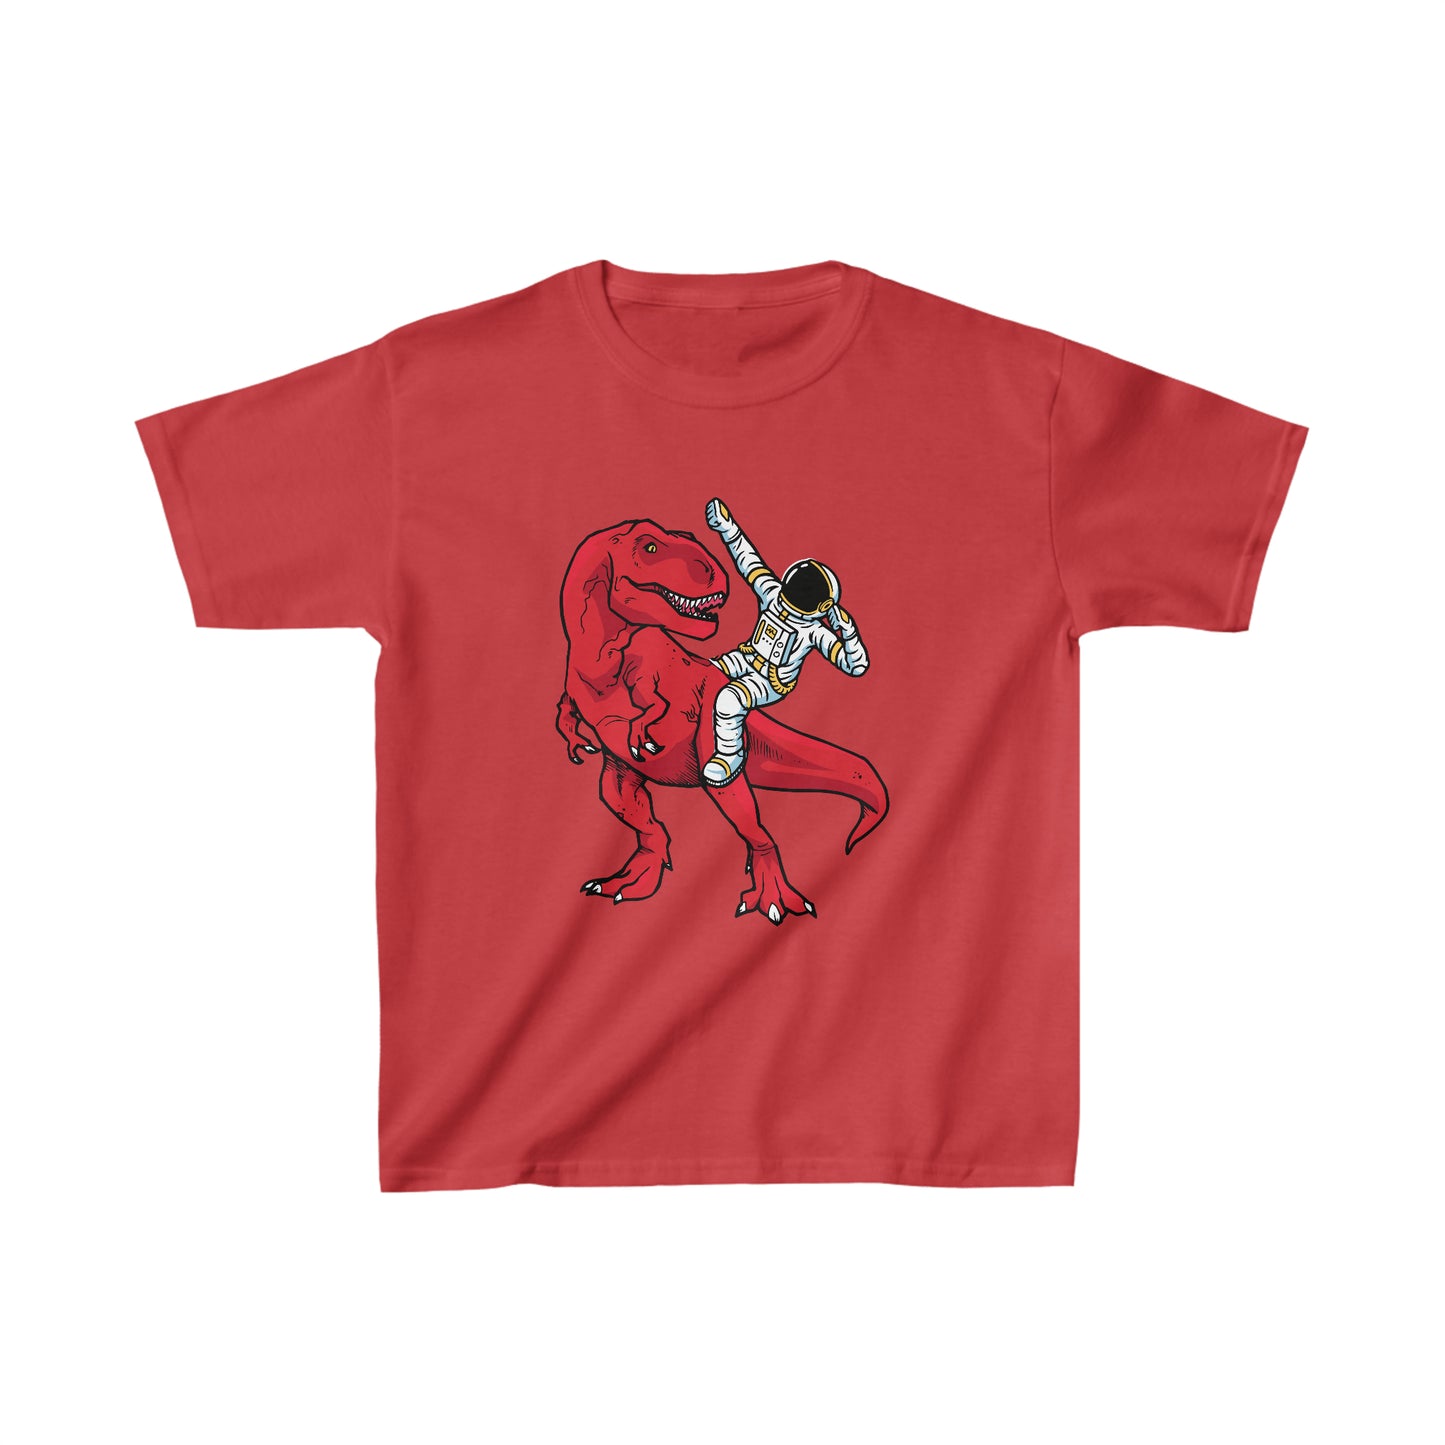 "T-Rex & Astronaut" Kids Shirt - Weave Got Gifts - Unique Gifts You Won’t Find Anywhere Else!